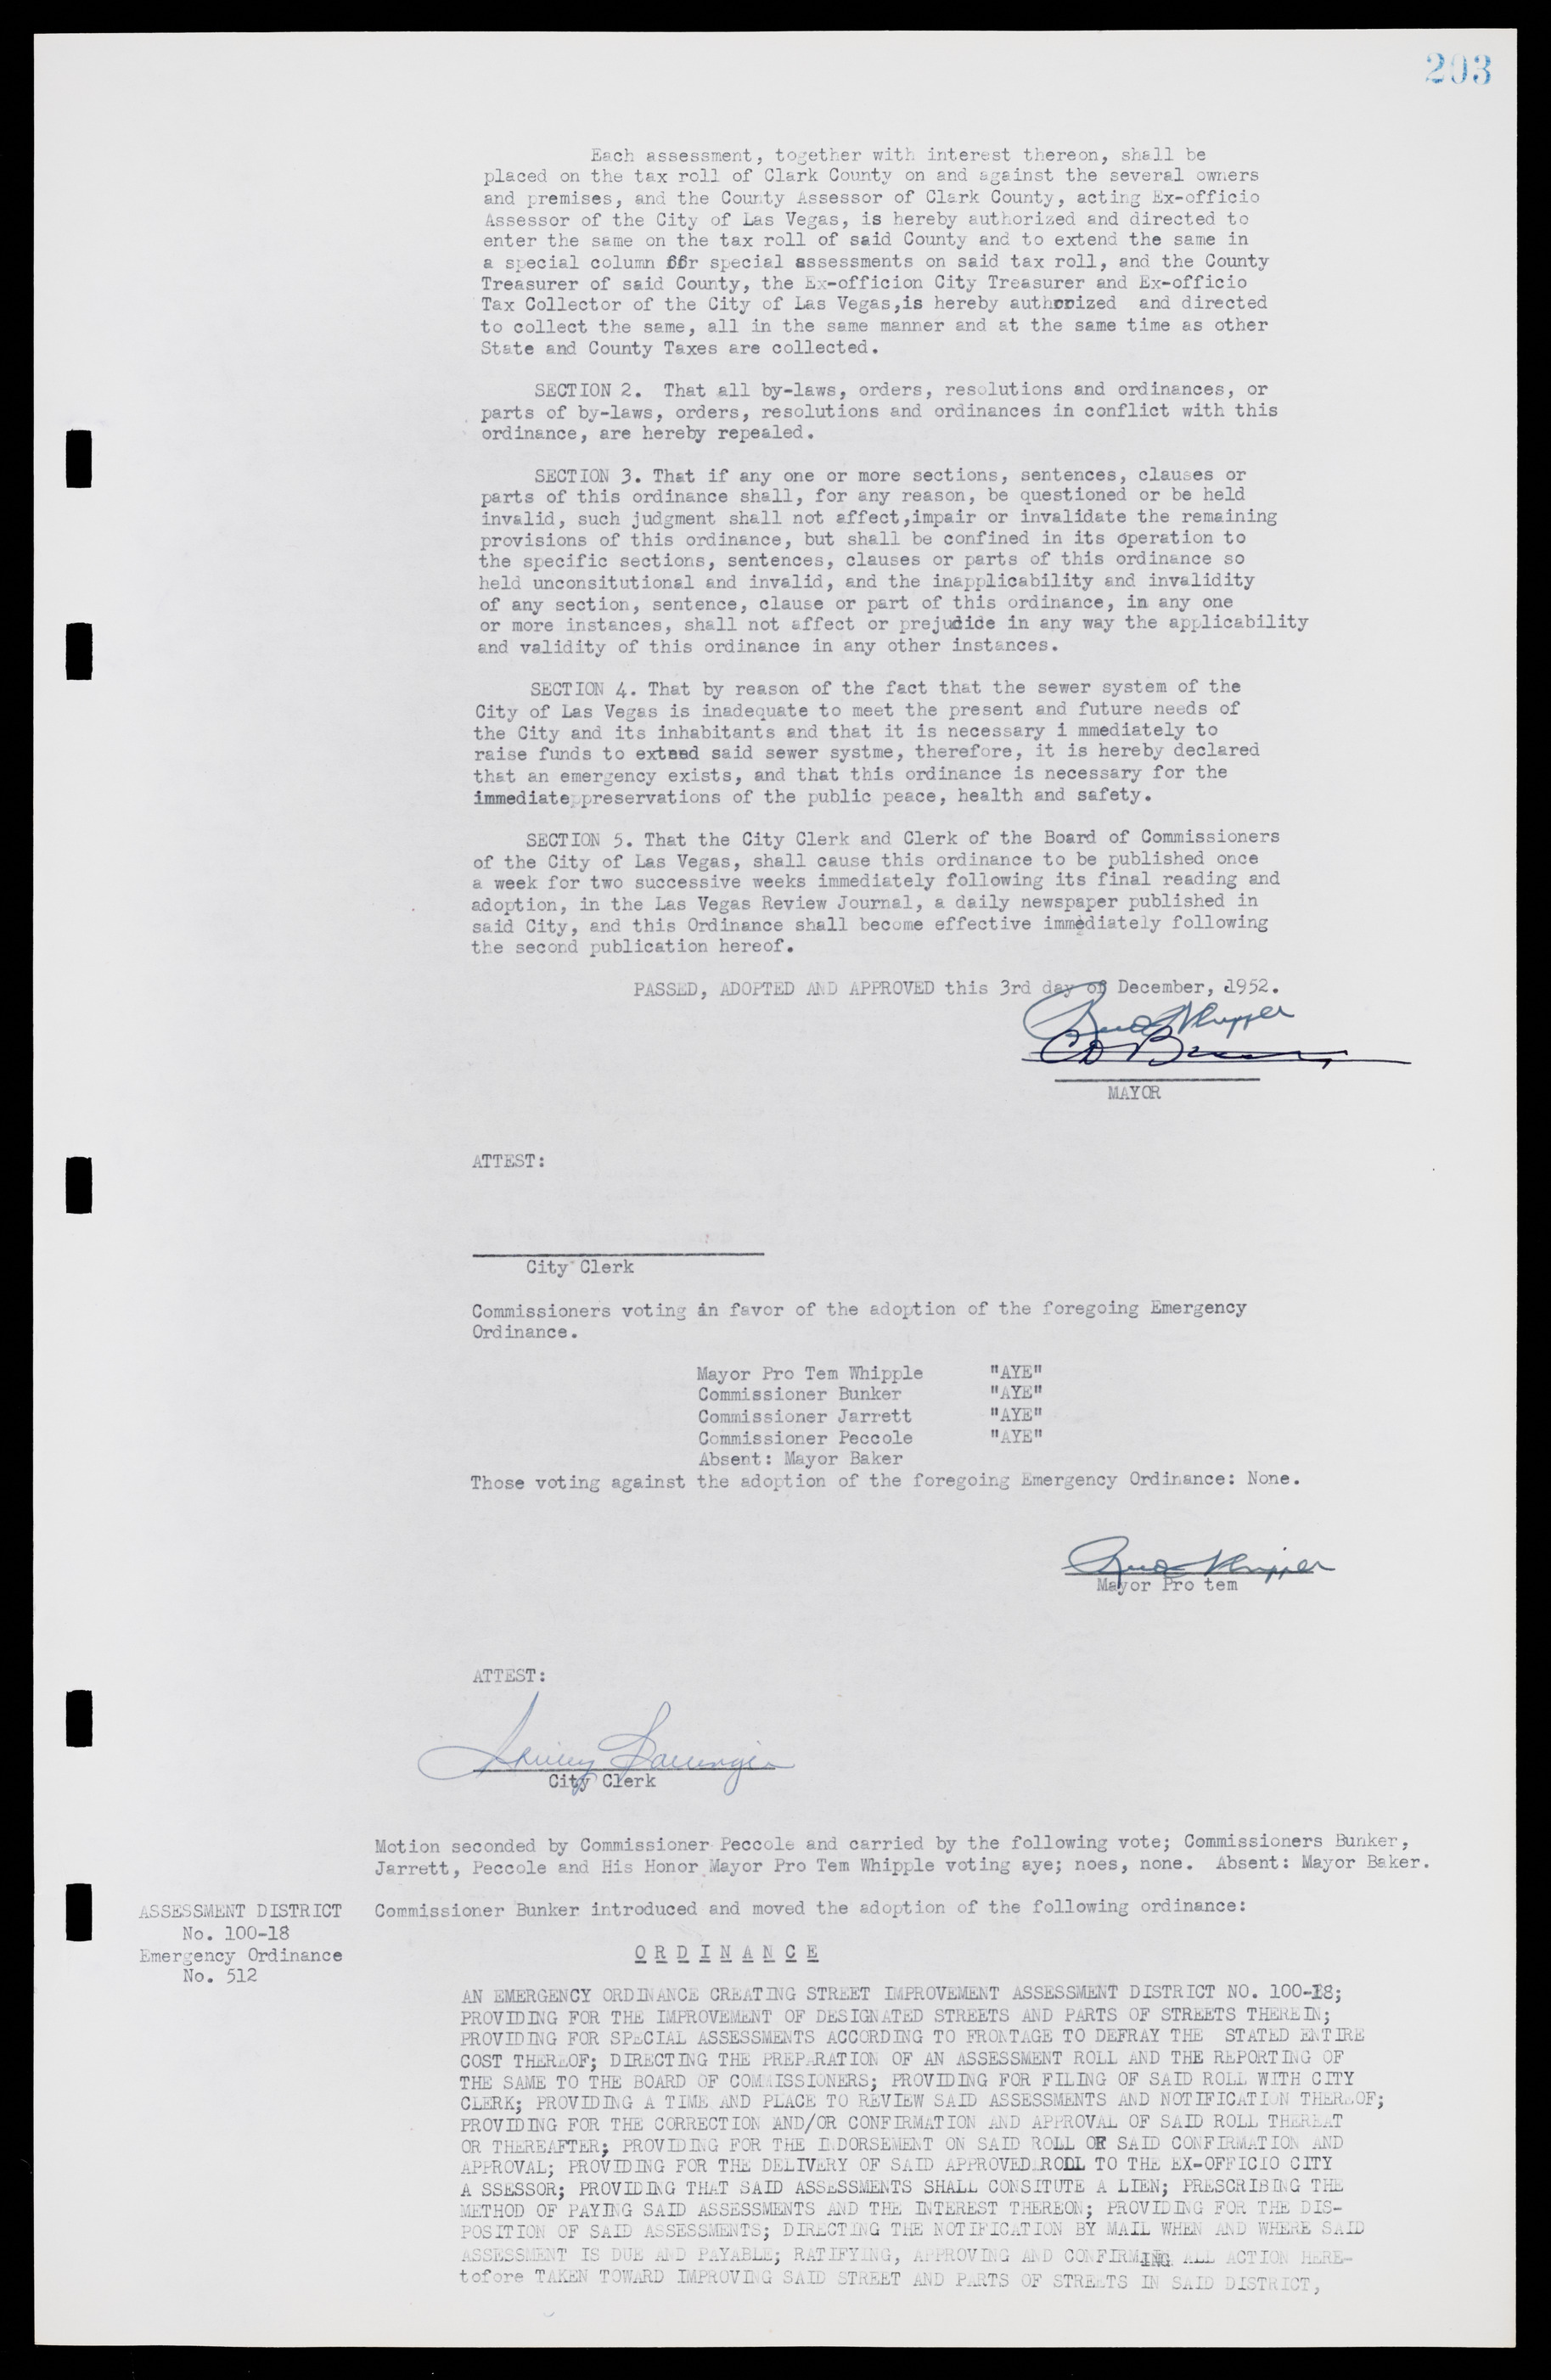 Las Vegas City Commission Minutes, May 26, 1952 to February 17, 1954, lvc000008-217